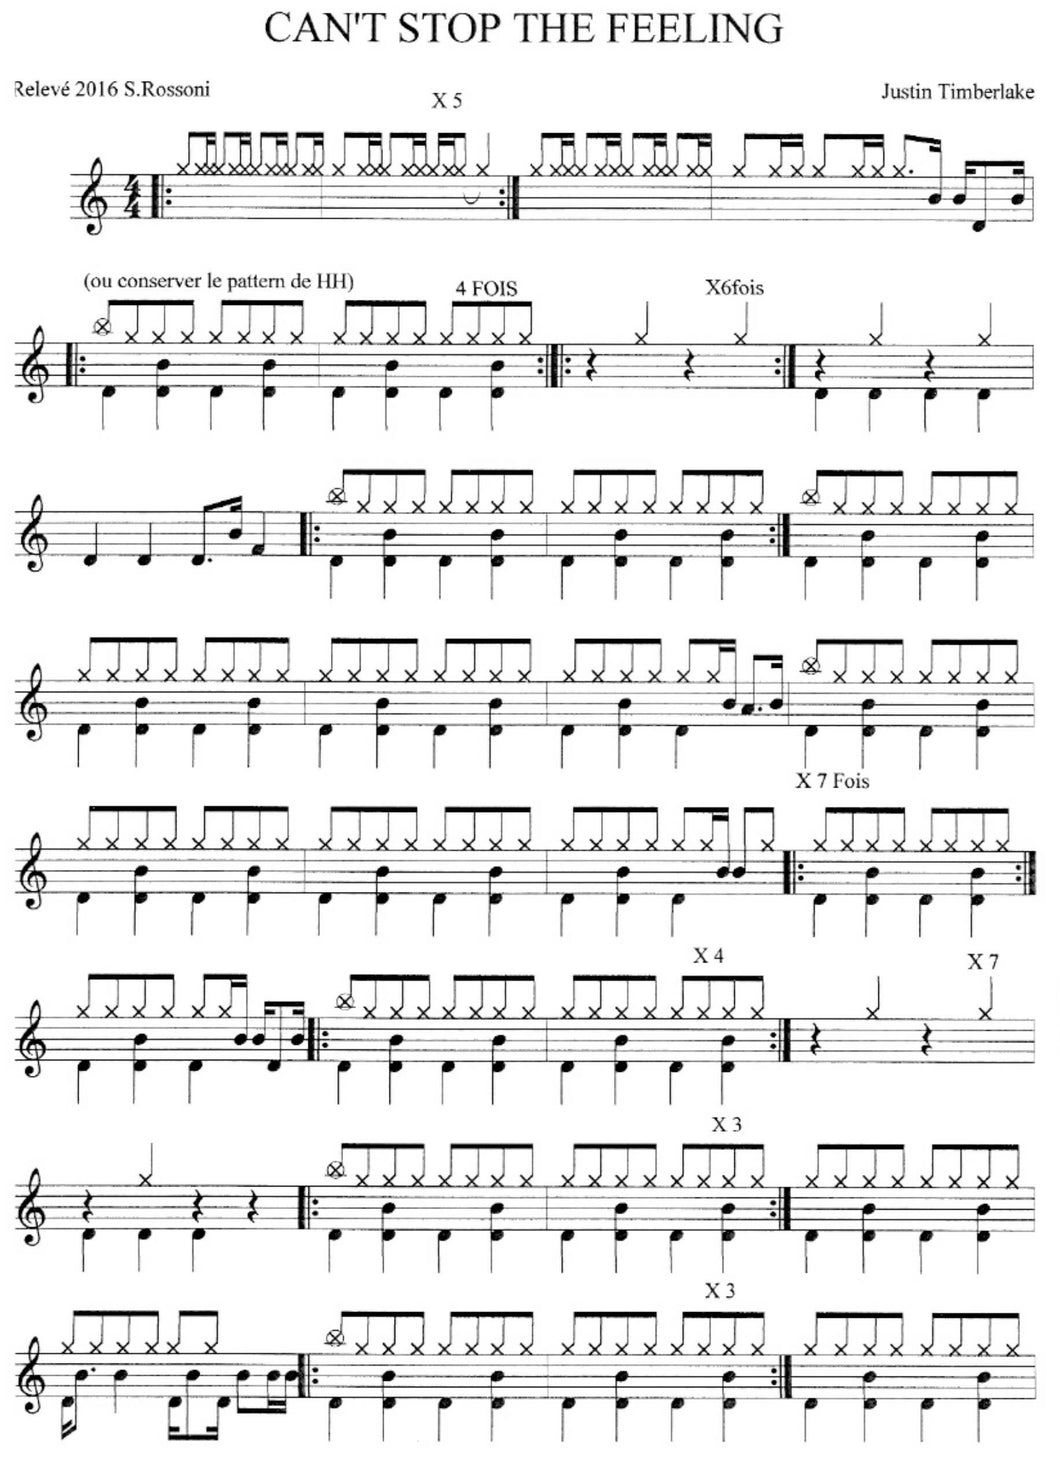 Can't Stop the Feeling! - Justin Timberlake - Full Drum Transcription / Drum Sheet Music - Rossoni